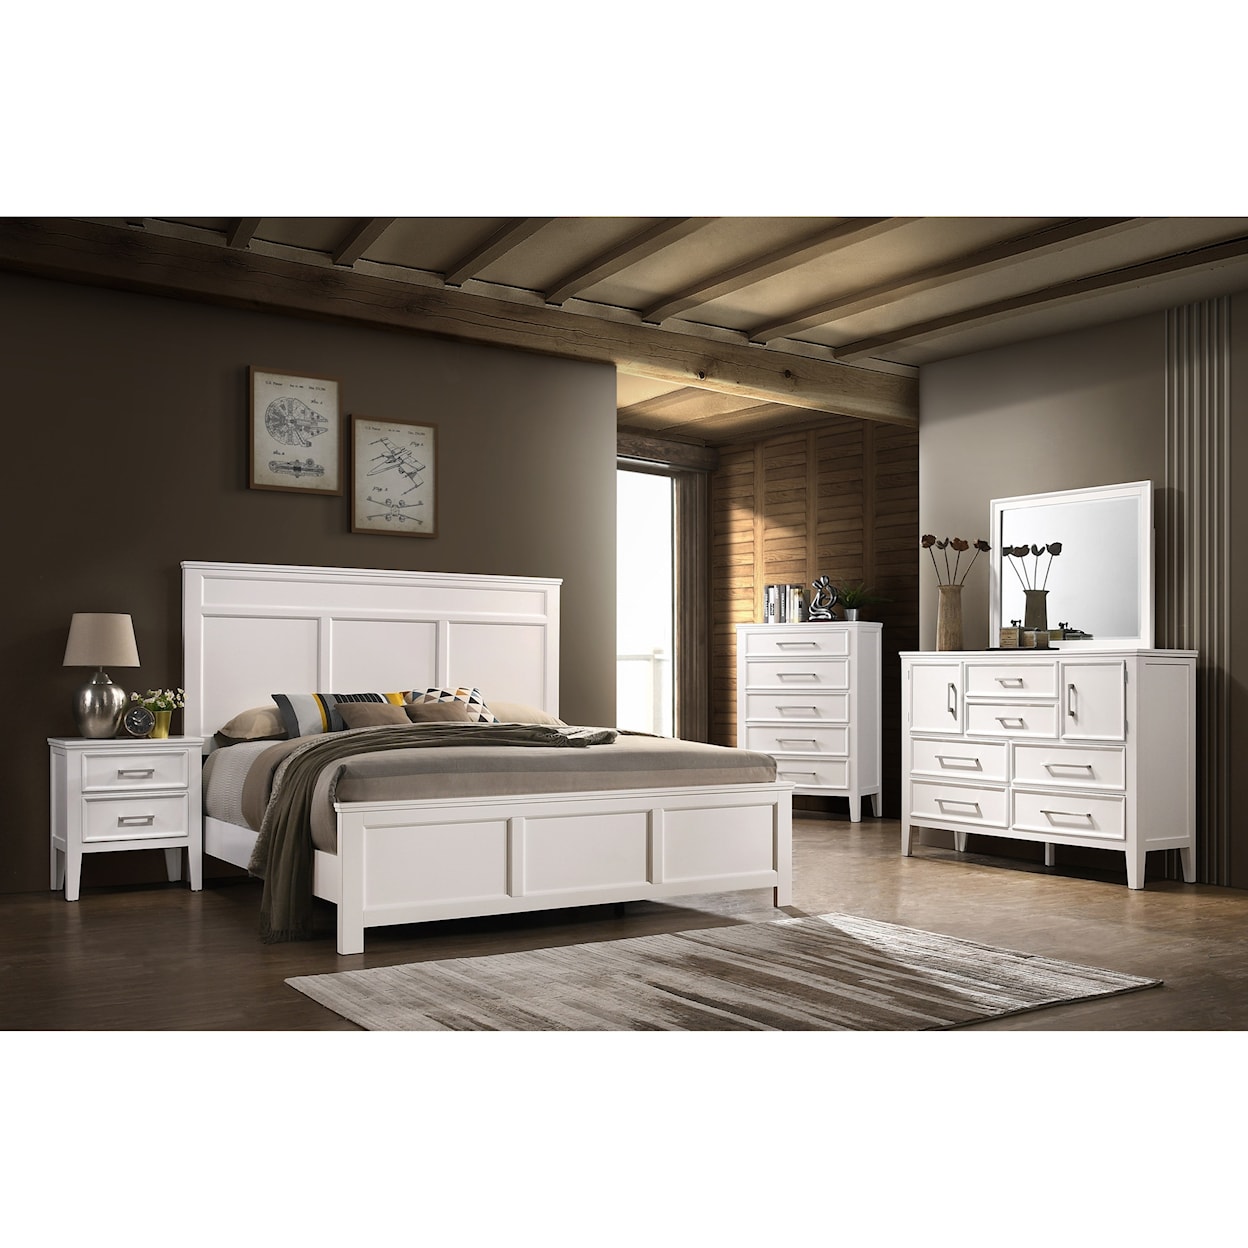 New Classic Furniture Andover King Bedroom Group